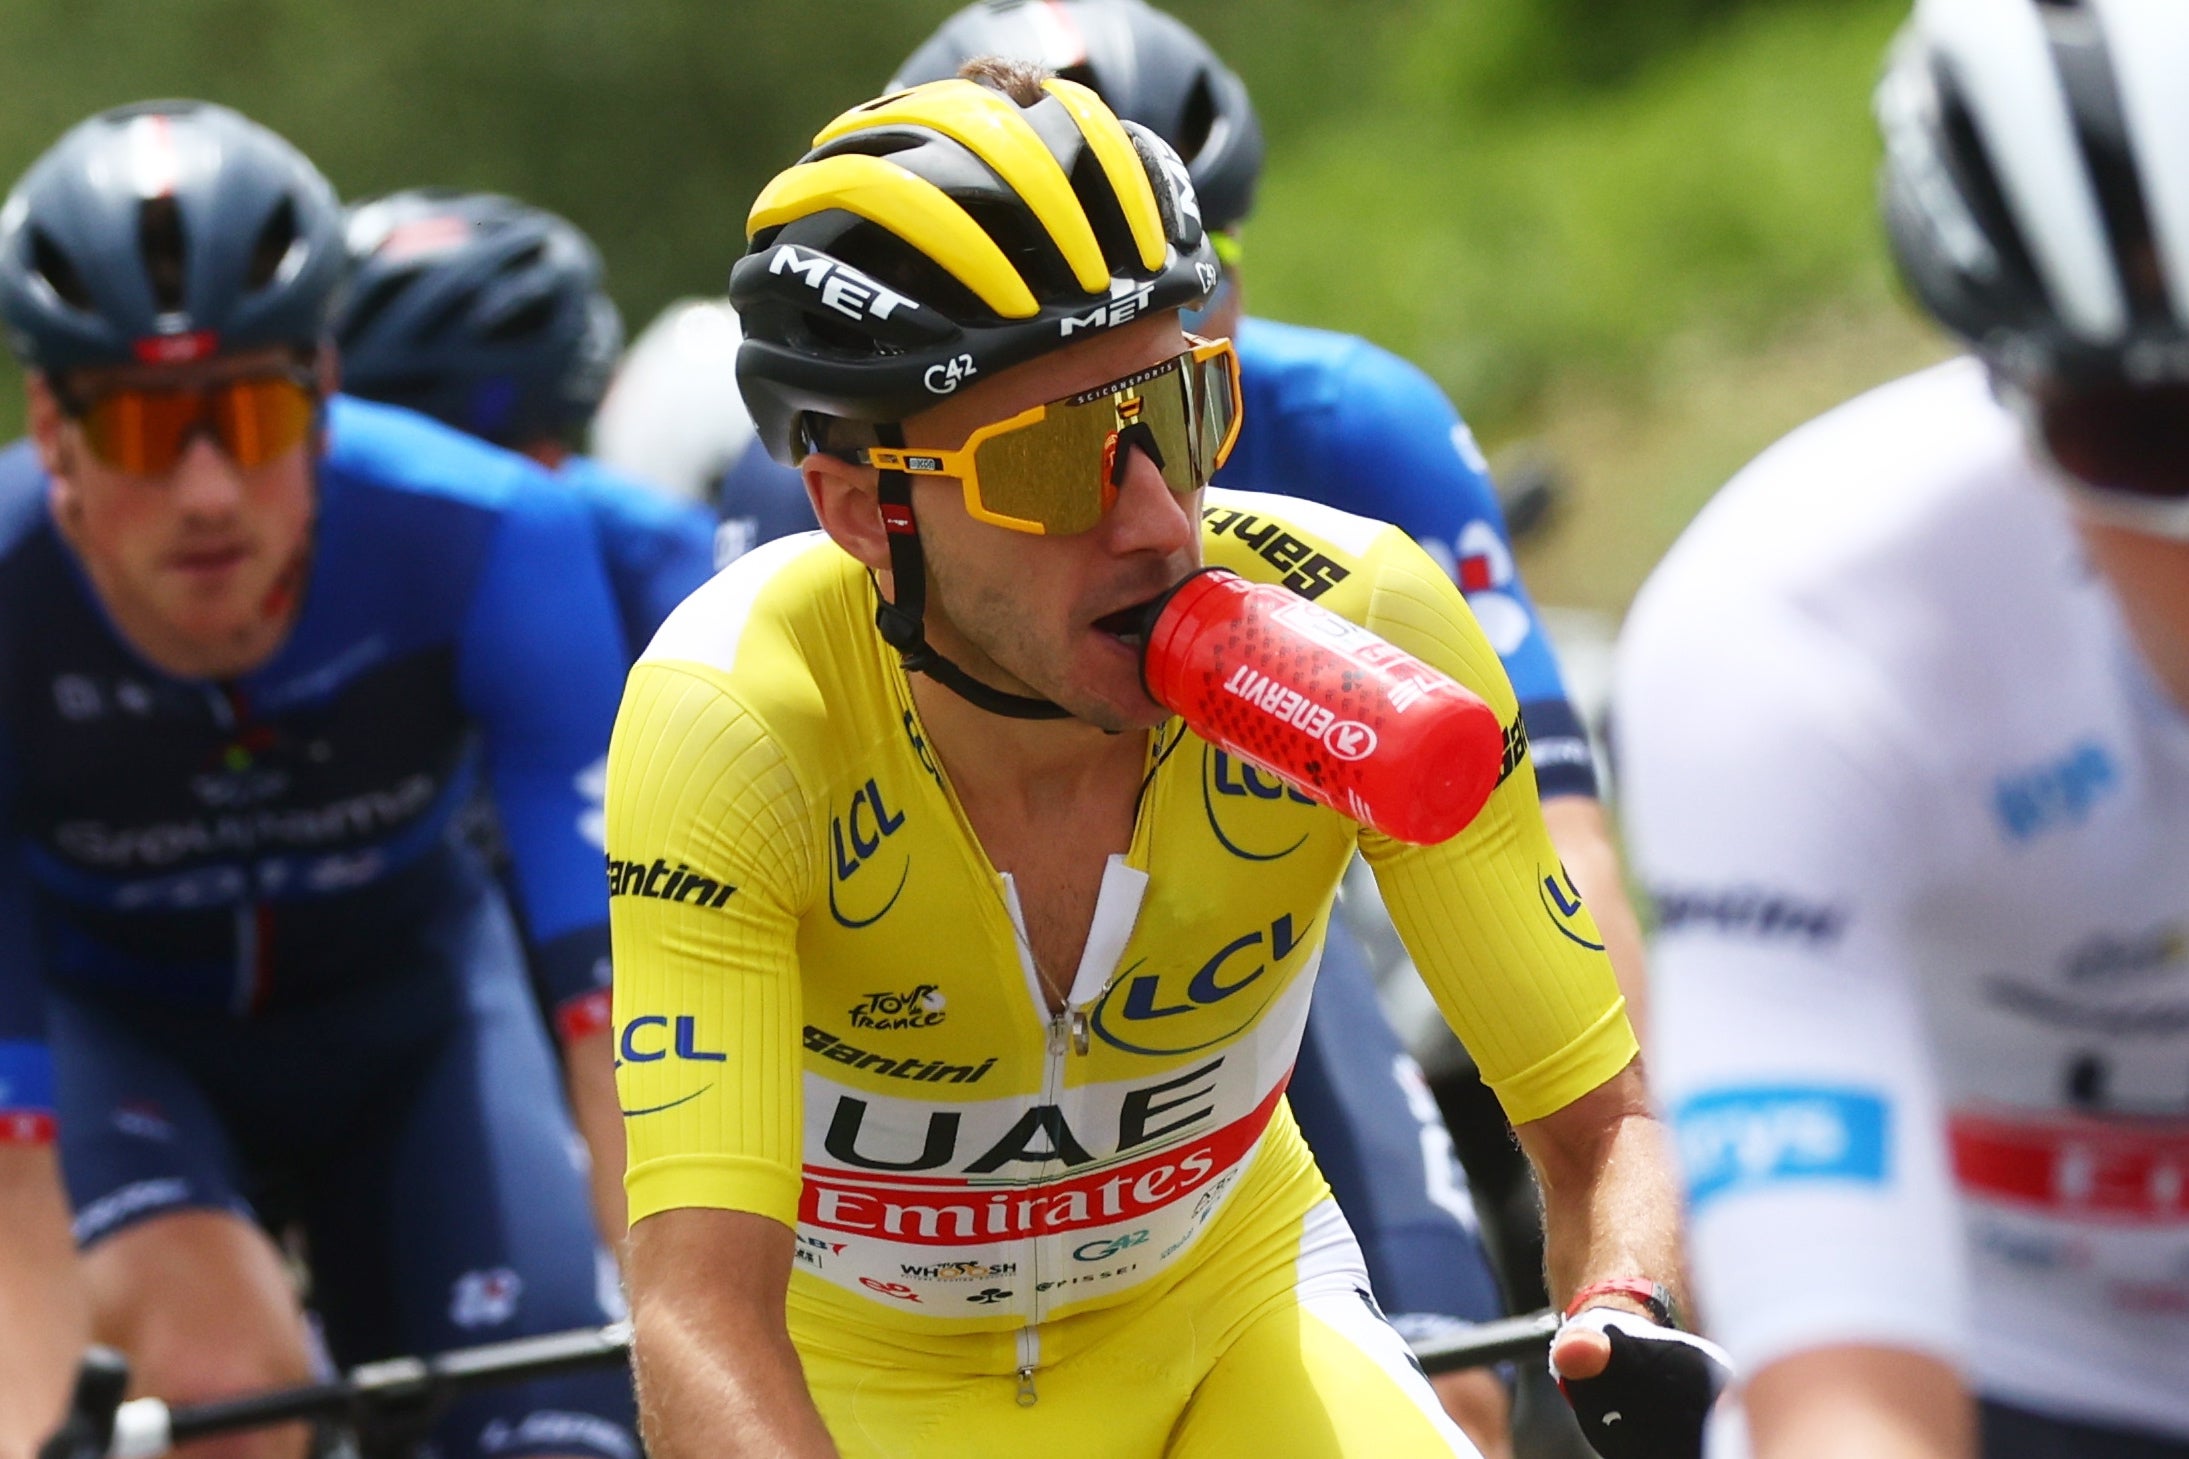 Tour de France on TV Channel, start time and how to watch highlights online